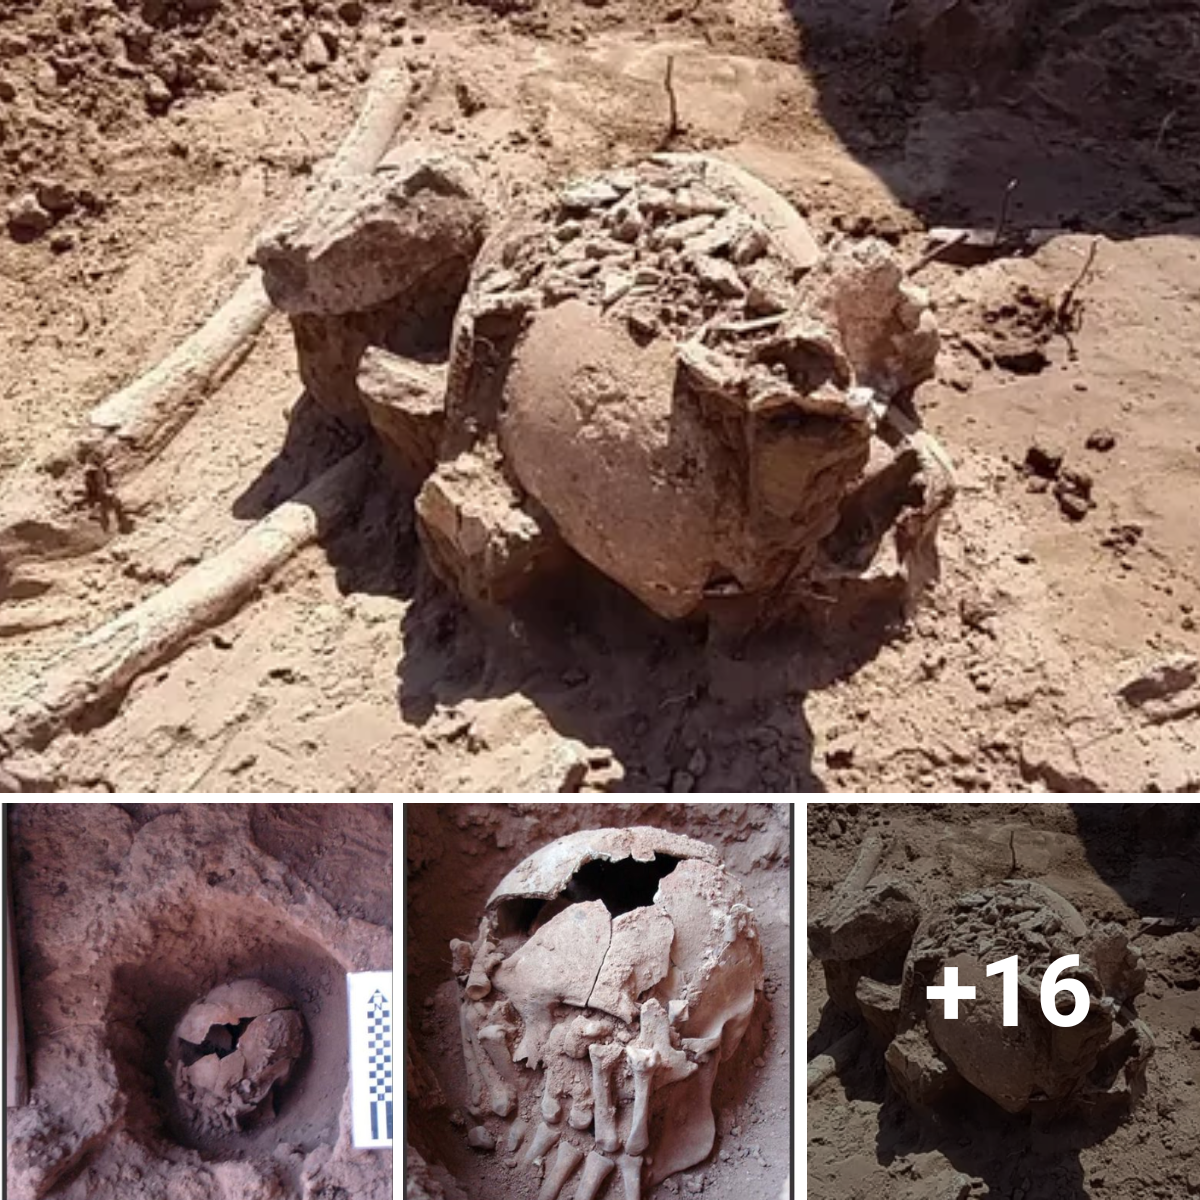 Ancient American beheading ritual found in 9,000-year-old amputated head